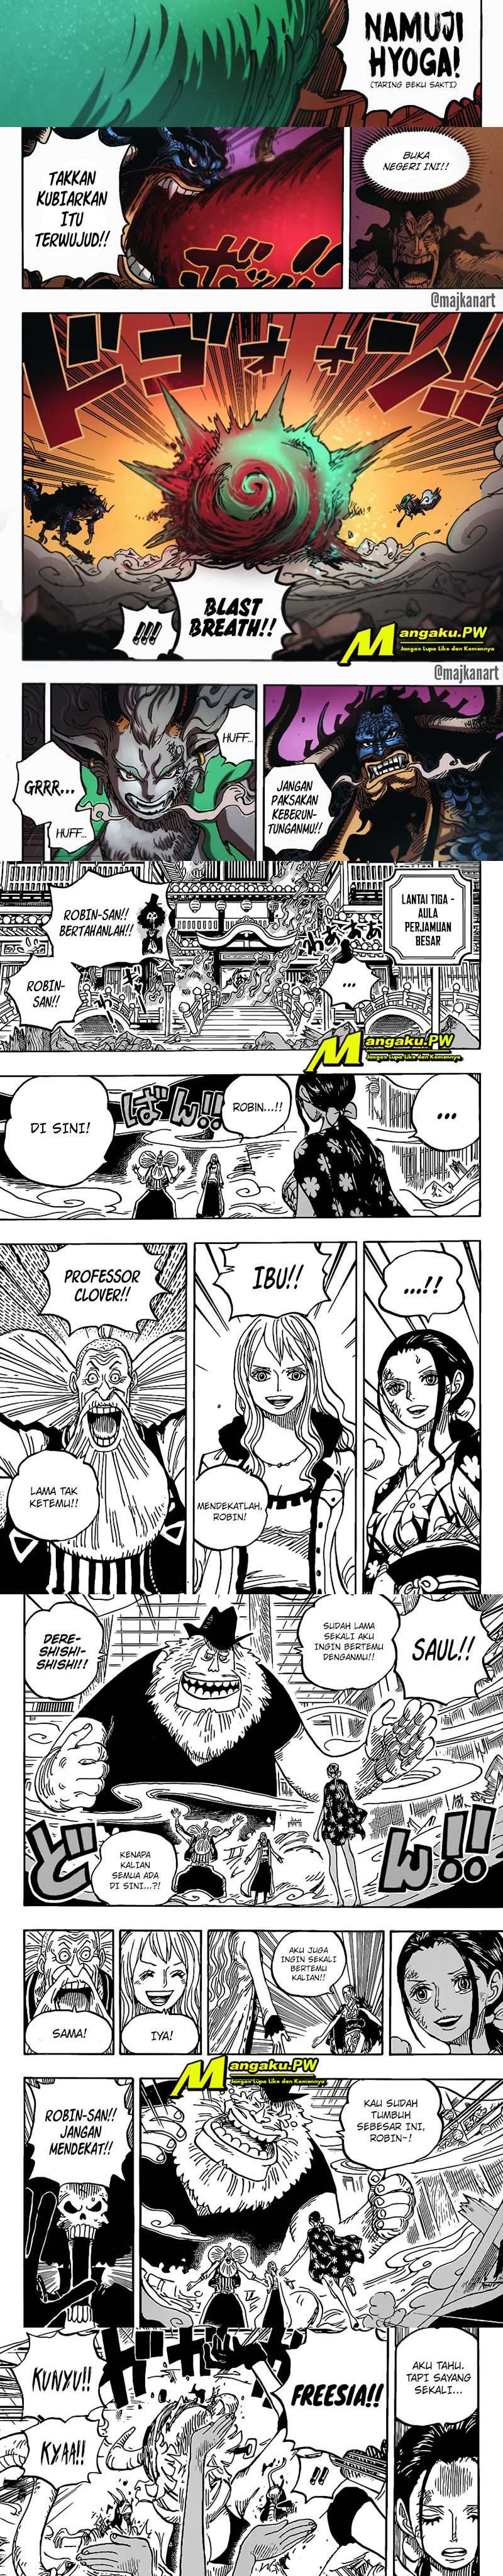 One Piece Chapter 1020 Hq - 39